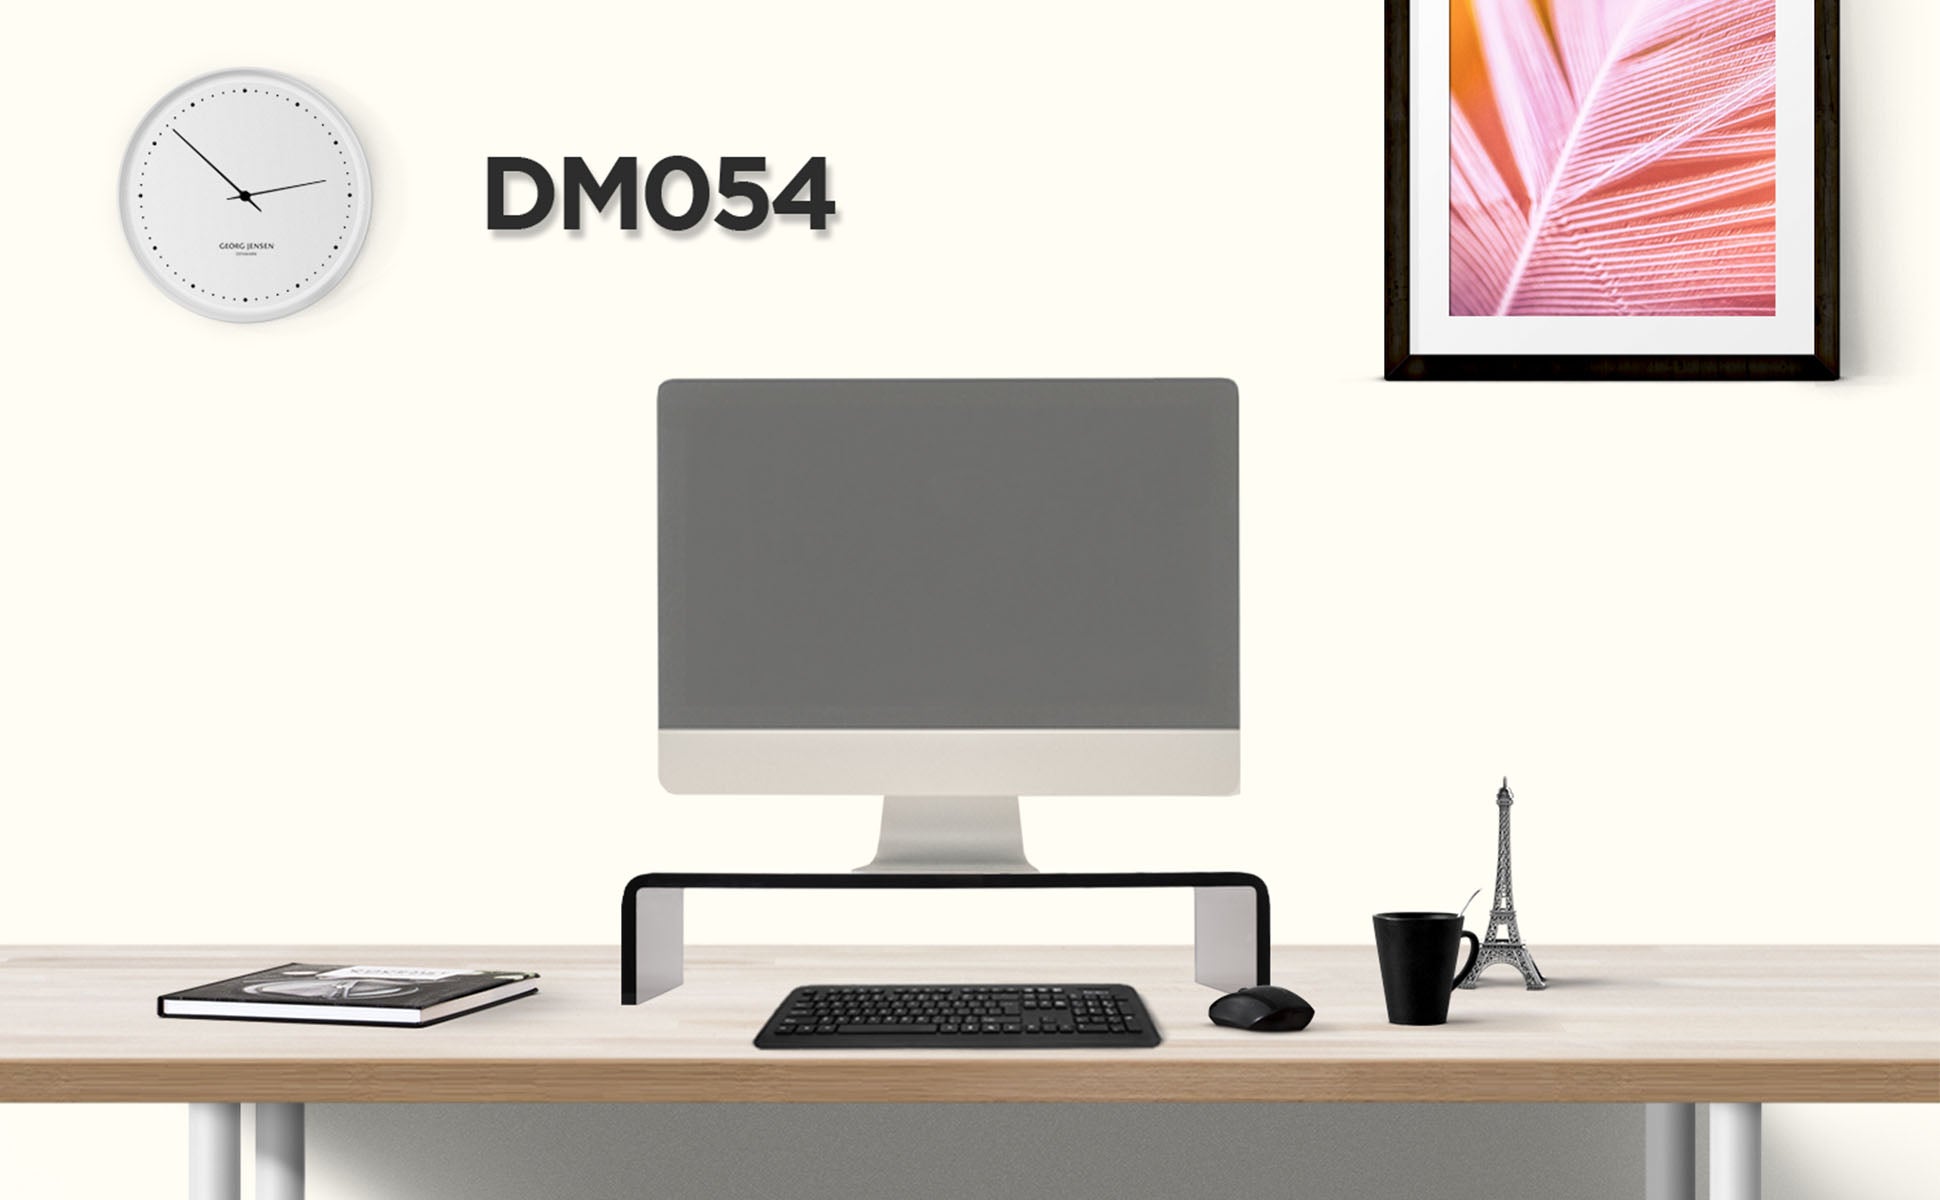 dm451x1, silver, desk, mount, bracket, stand, support, riser, arm, double, two, twin, duo, dual, office, computer